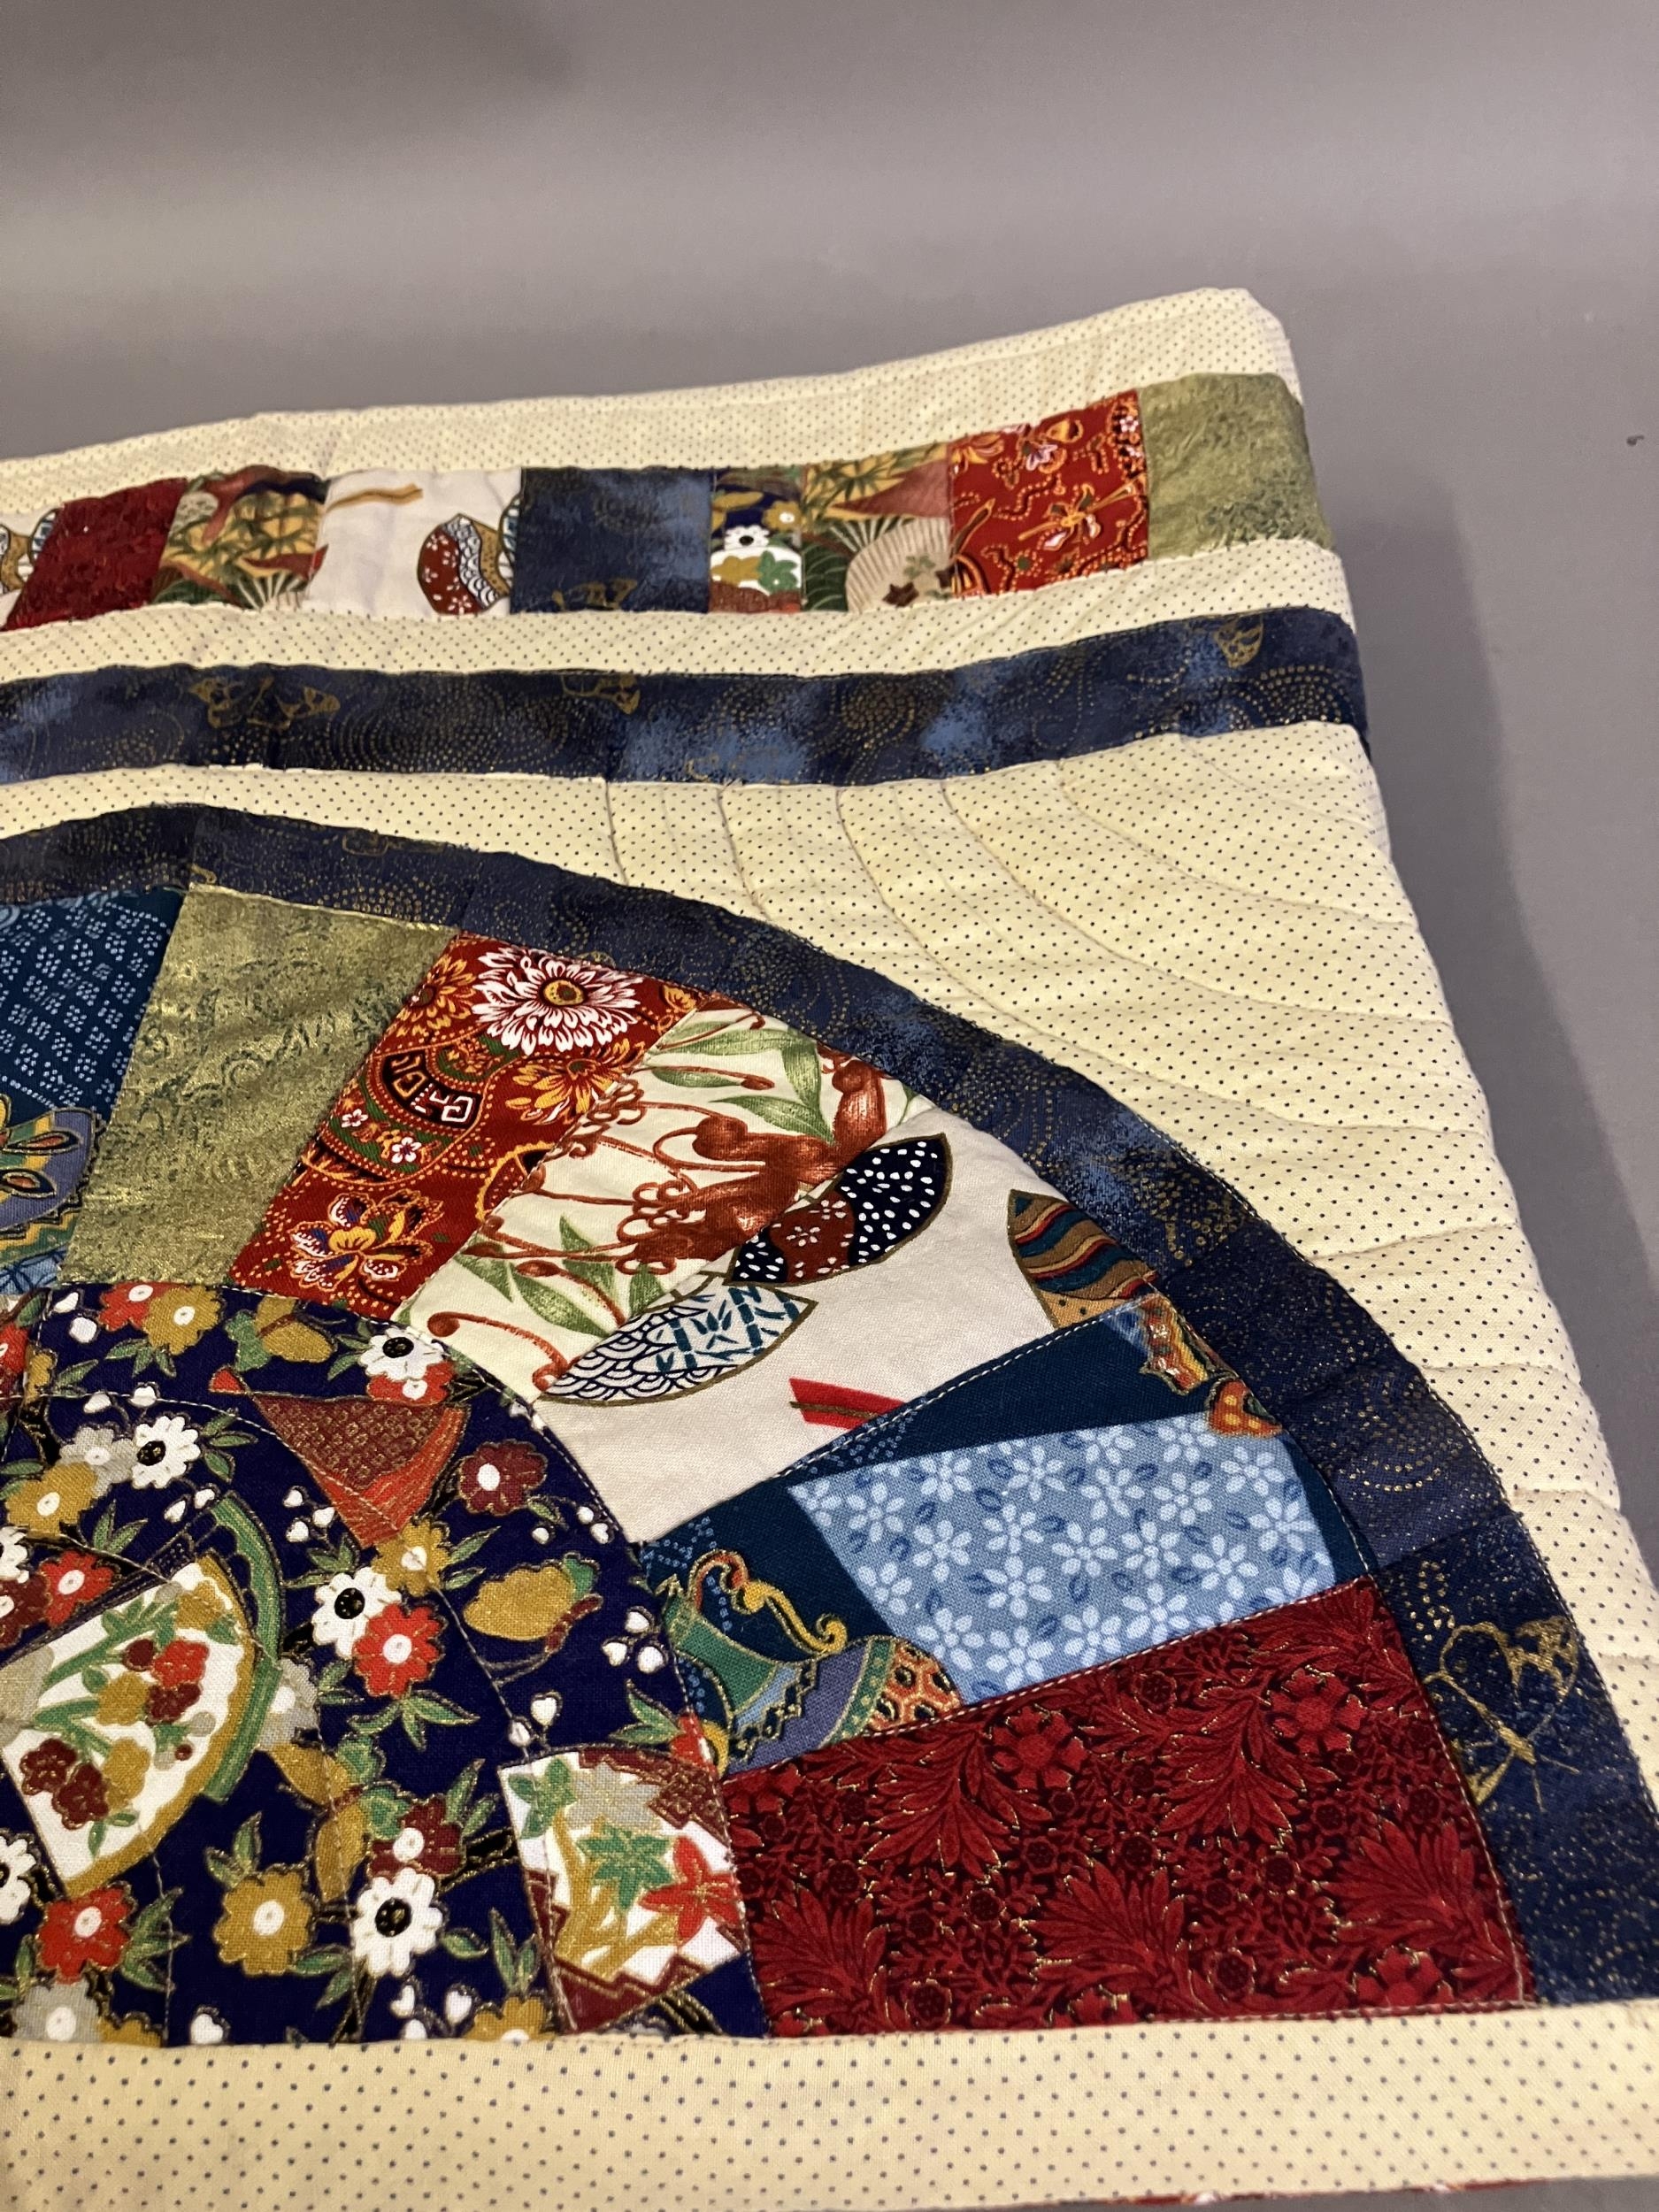 Original fan-designed machine-stitched coverlet by Doris Maxwell, mother of former Fan Circle - Image 4 of 6